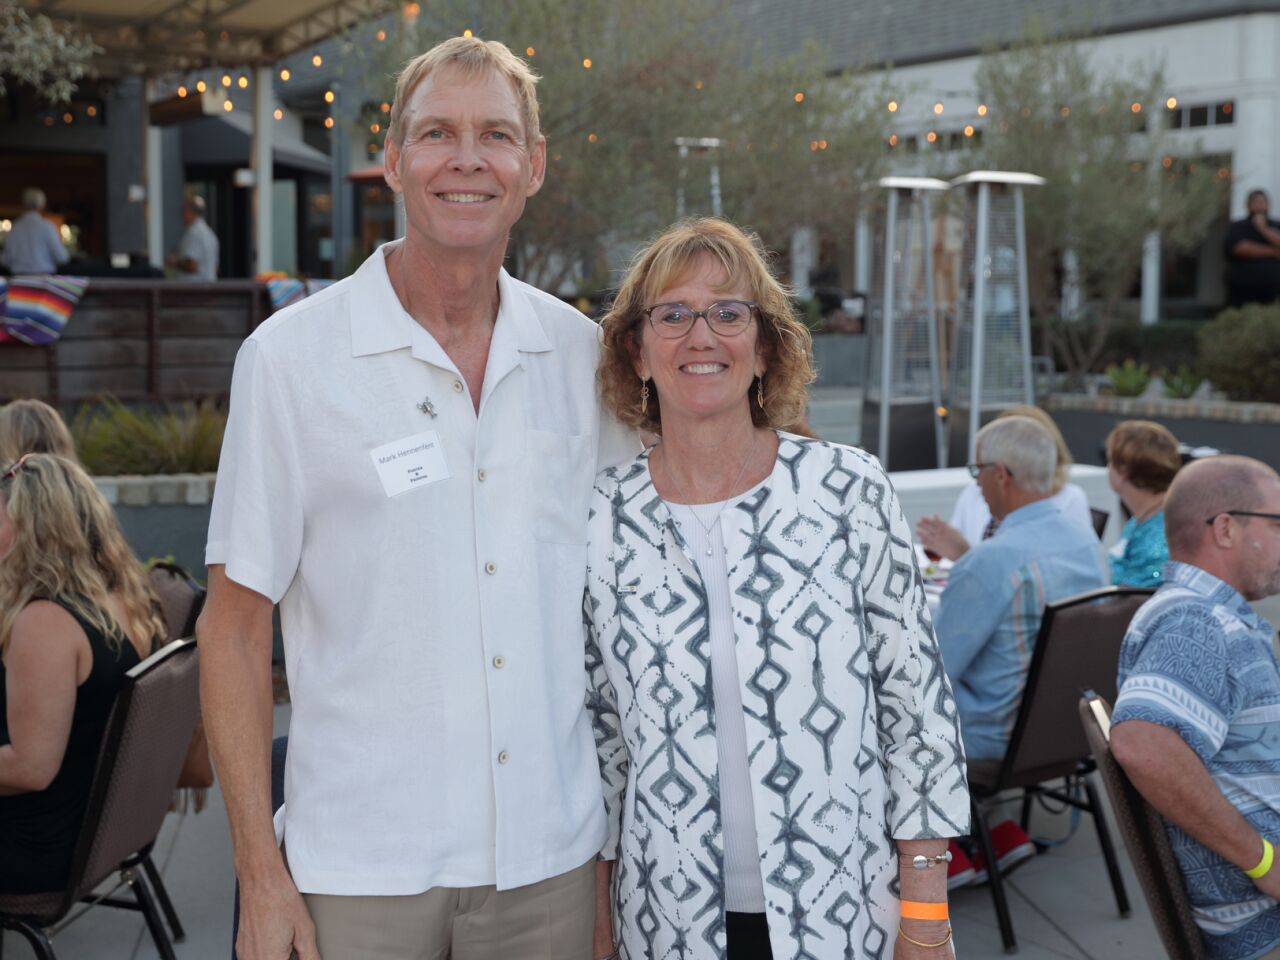 Mark and Susan Hennenfent (Pres, Del Mar/Solana Beach Rotary)